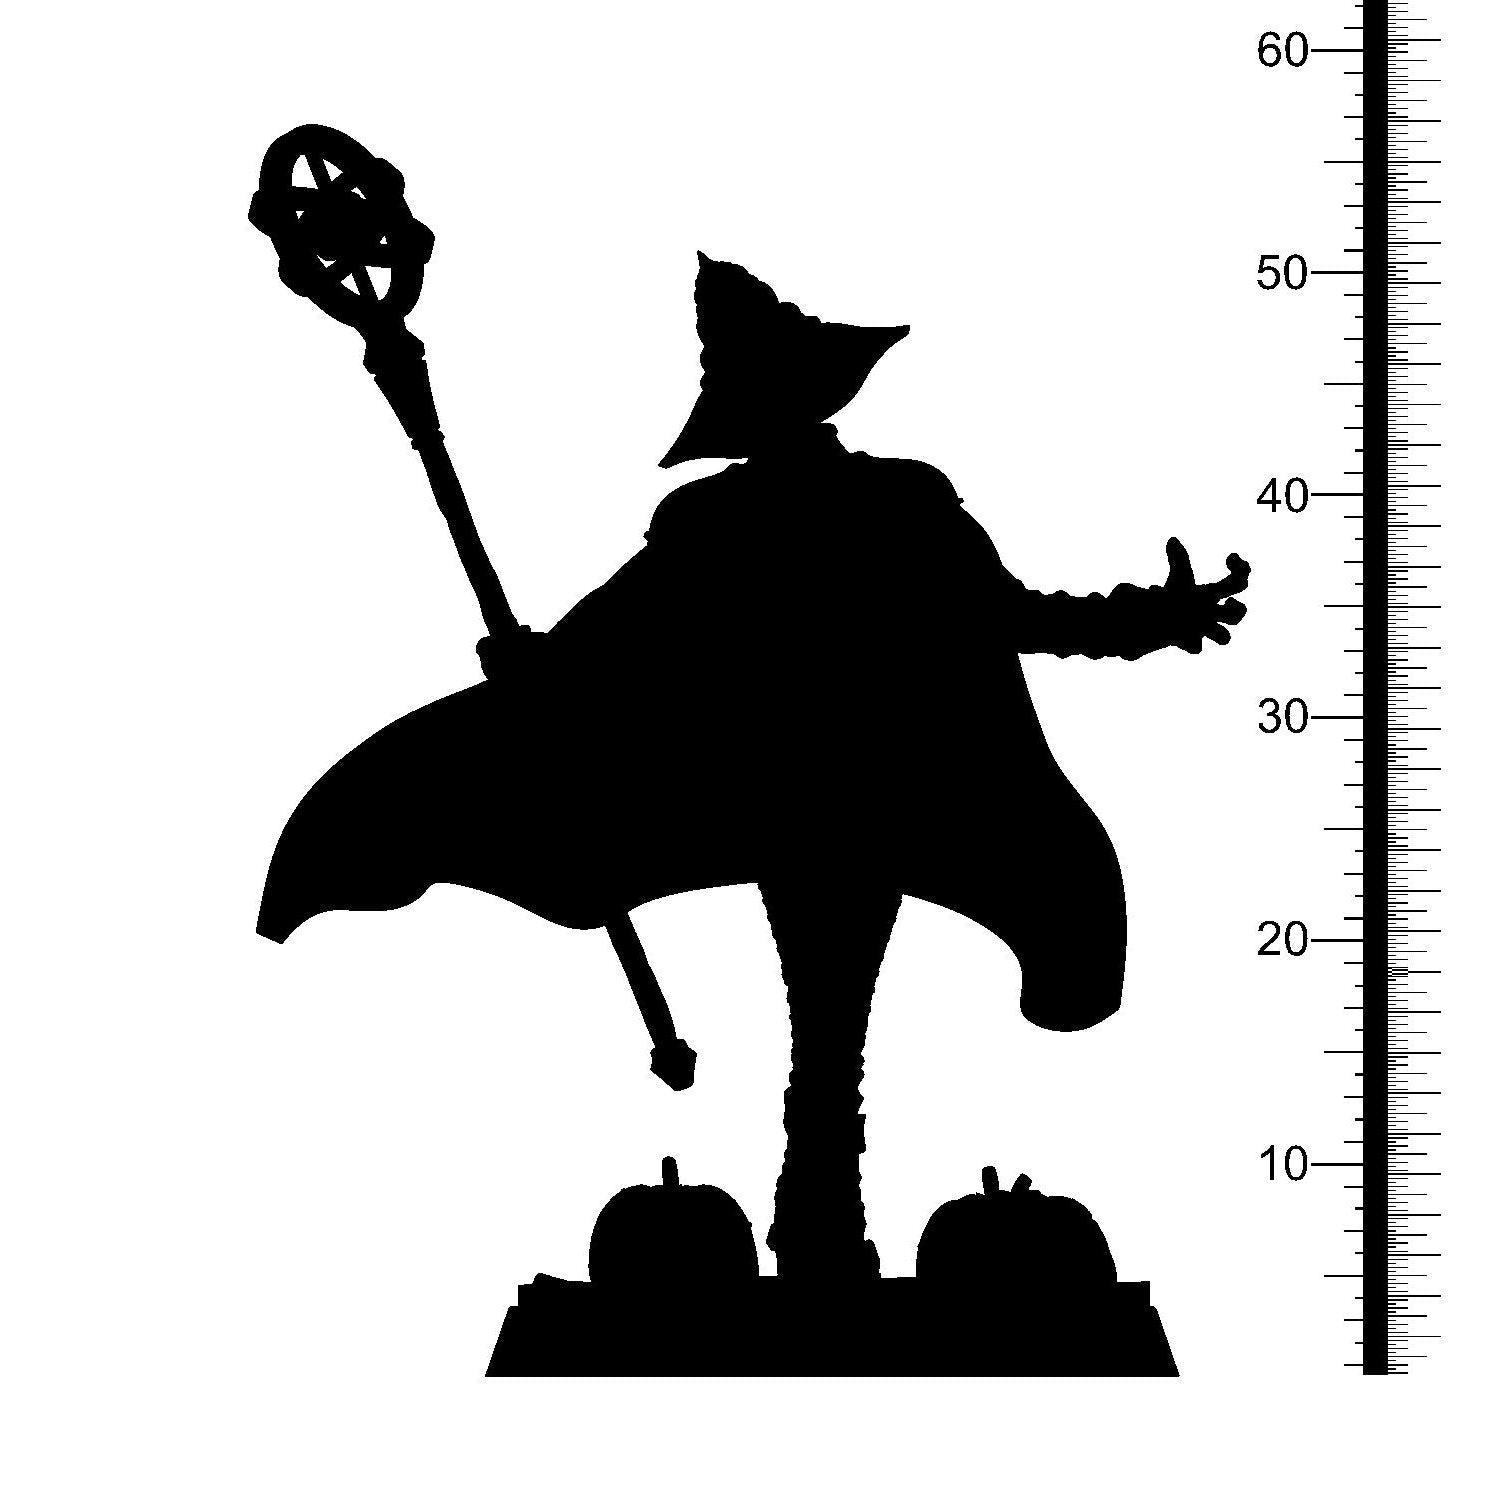 Shadowbane Halloween Miniature | Haunting Figure for Spooky Tabletop Adventures | 32mm Scale - Plague Miniatures shop for DnD Miniatures